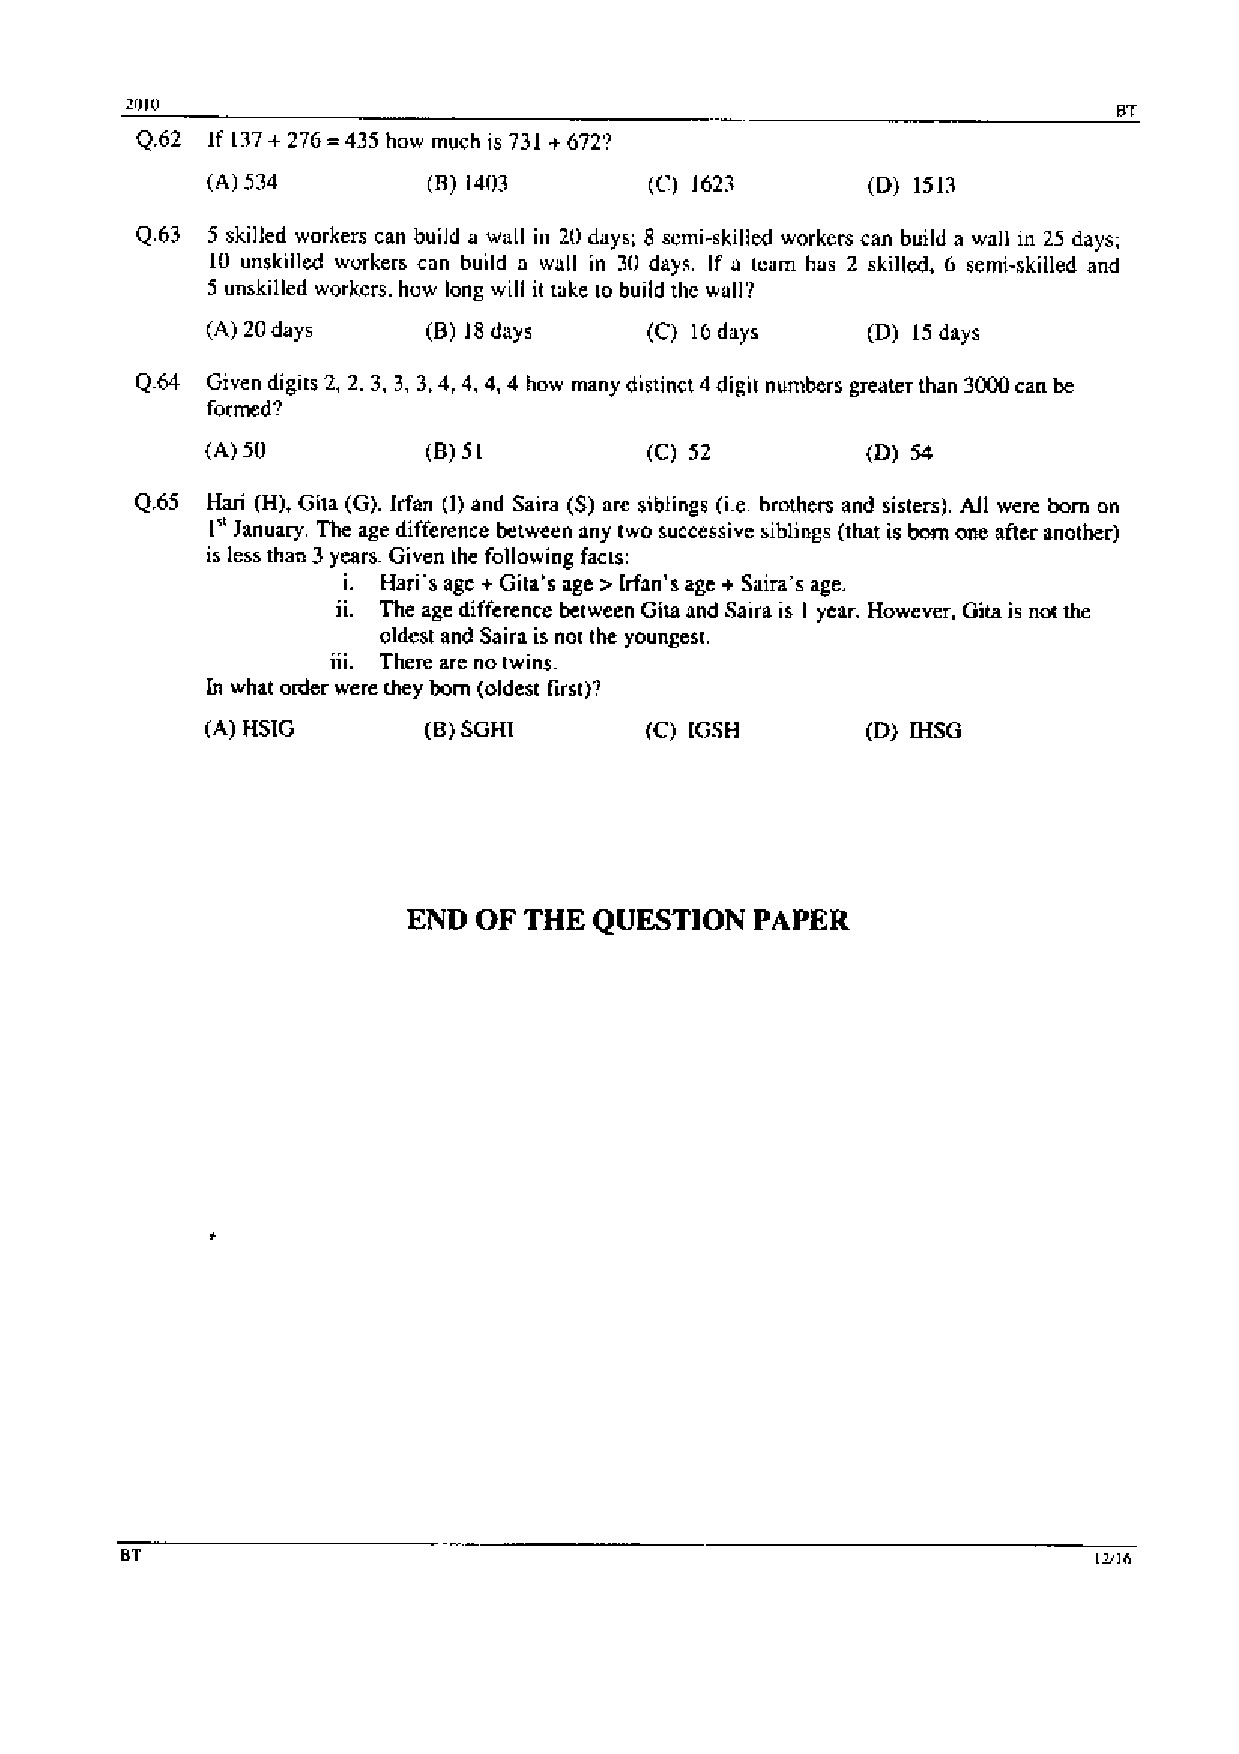 GATE Exam Question Paper 2010 Biotechnology 12